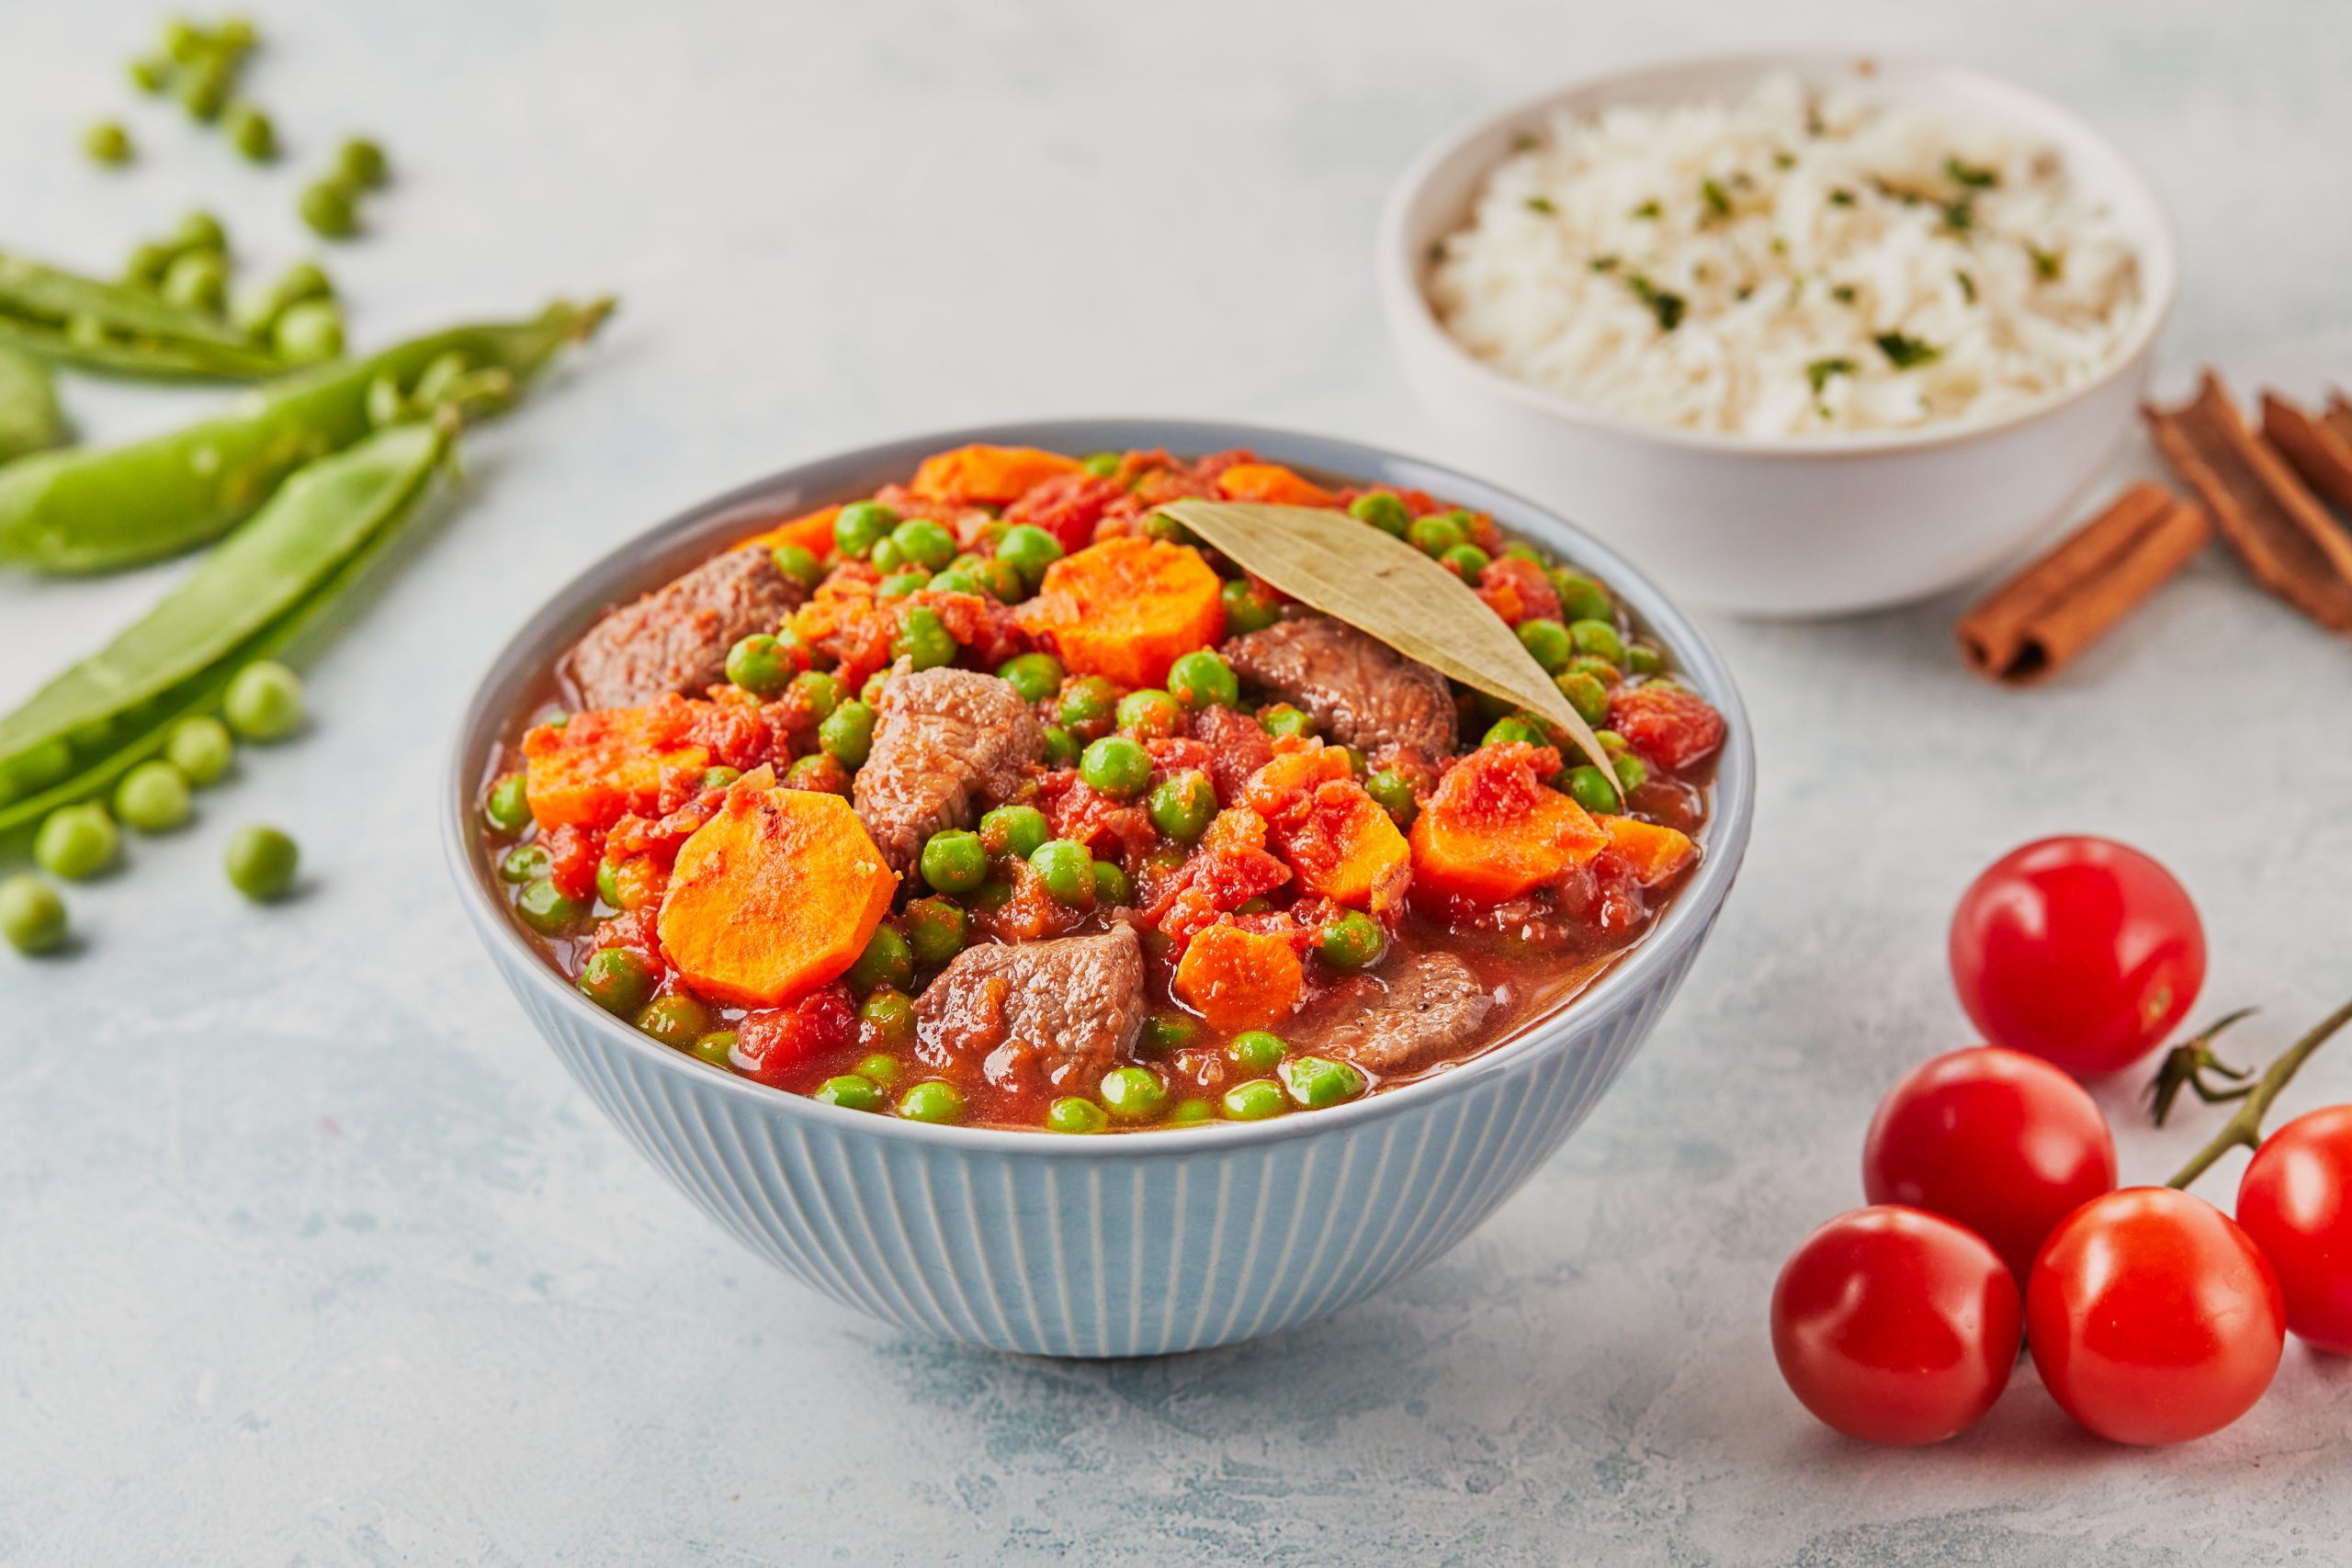 Pea & Lamb Stew with Rice